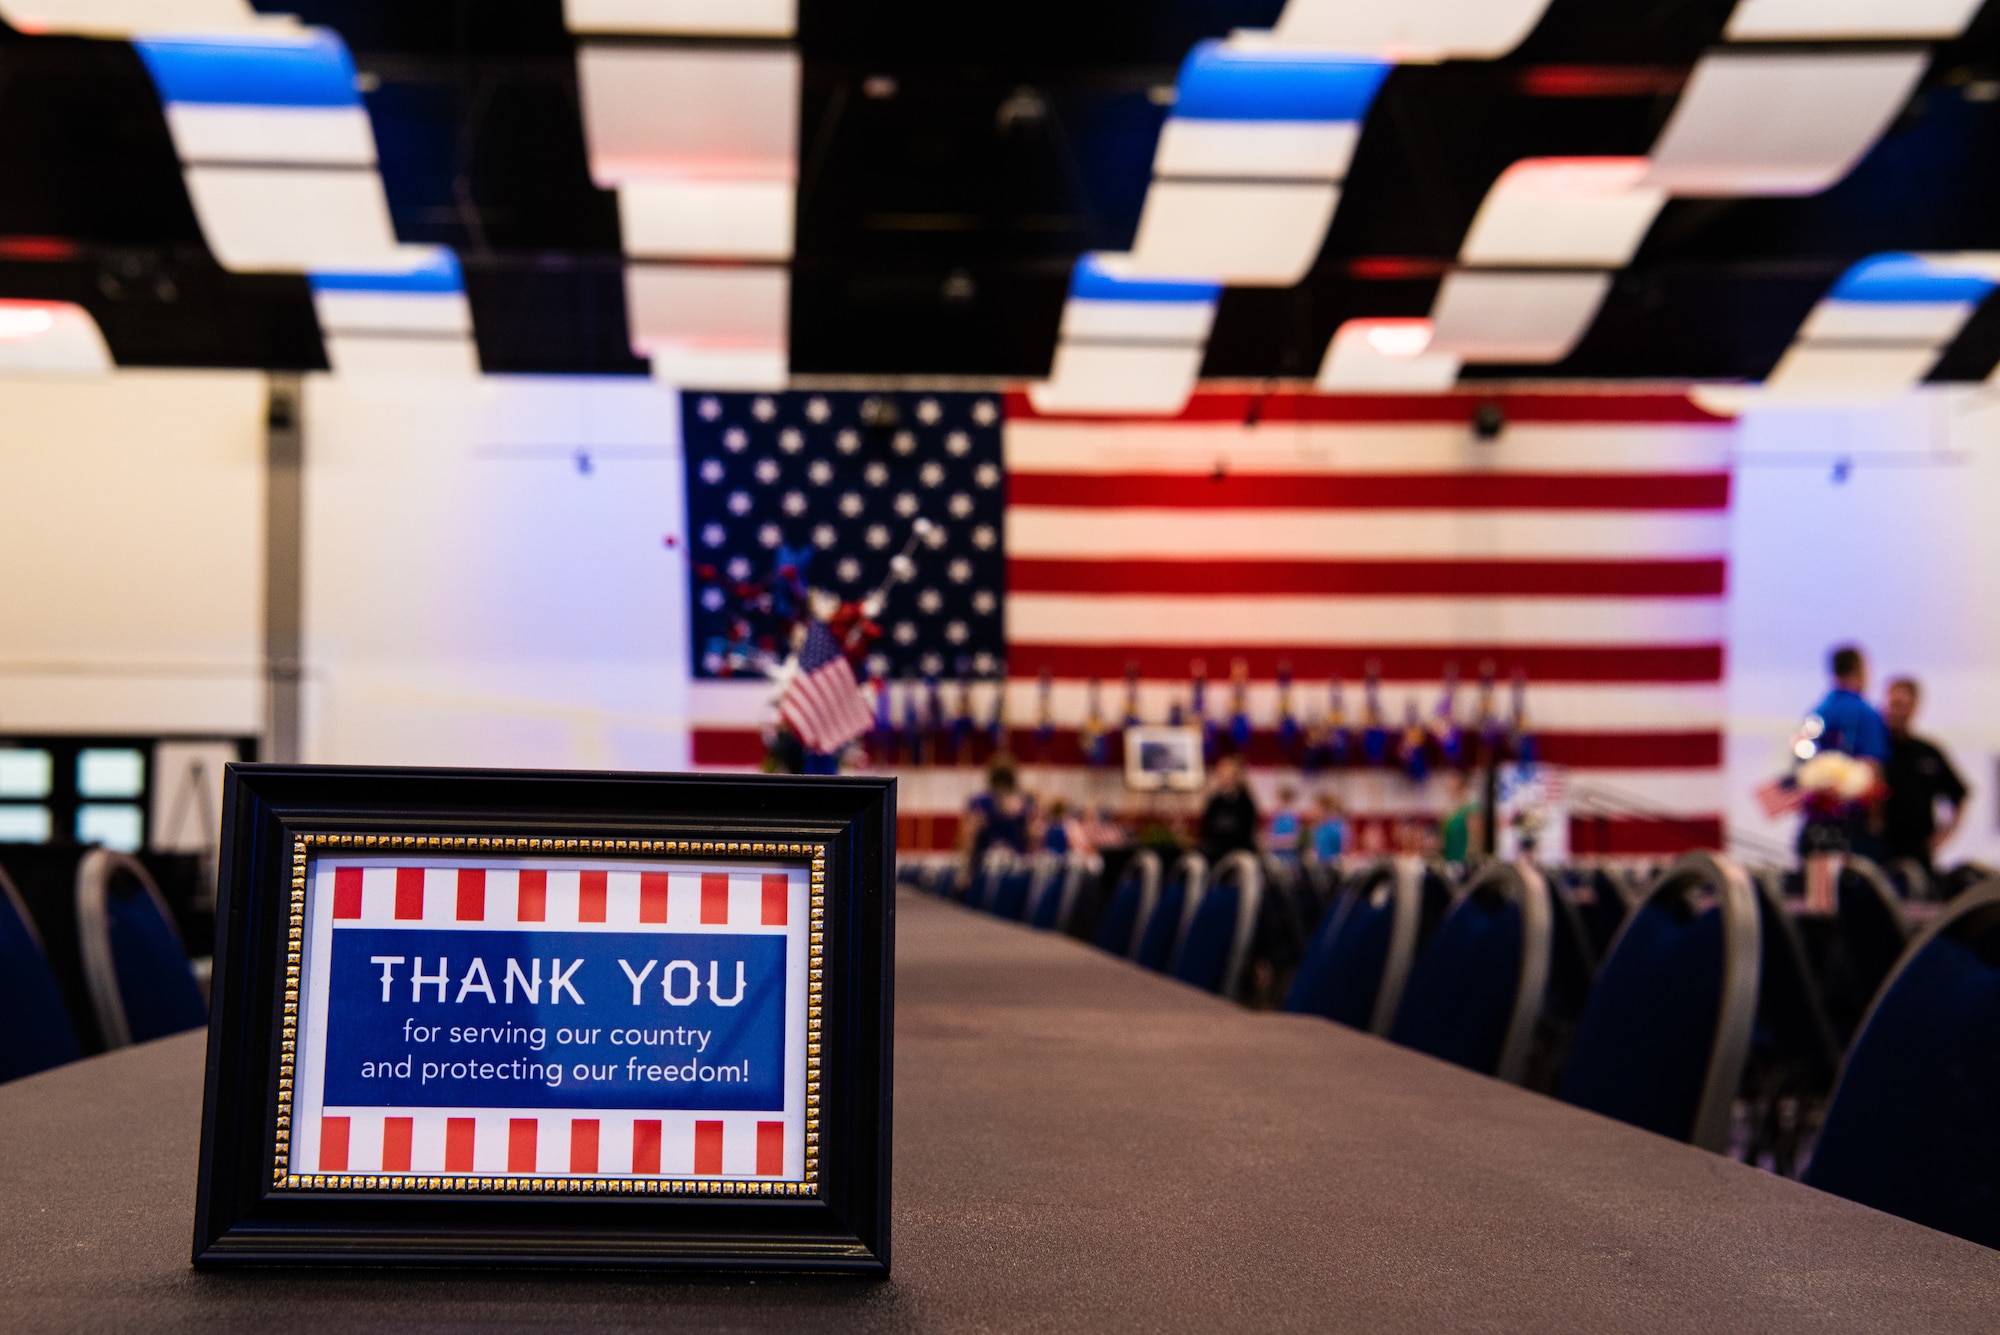 A ‘Thank you’ sign is displayed on a table at the World’s Largest BBQ at the Abilene Convention Center in Abilene, Texas, April 15, 2023. The Abilene Military Affairs Committee hosted the 58th Annual World’s Largest BBQ honoring military personnel and their service. (U.S. Air Force photo by Airman 1st Class Alondra Cristobal Hernandez)